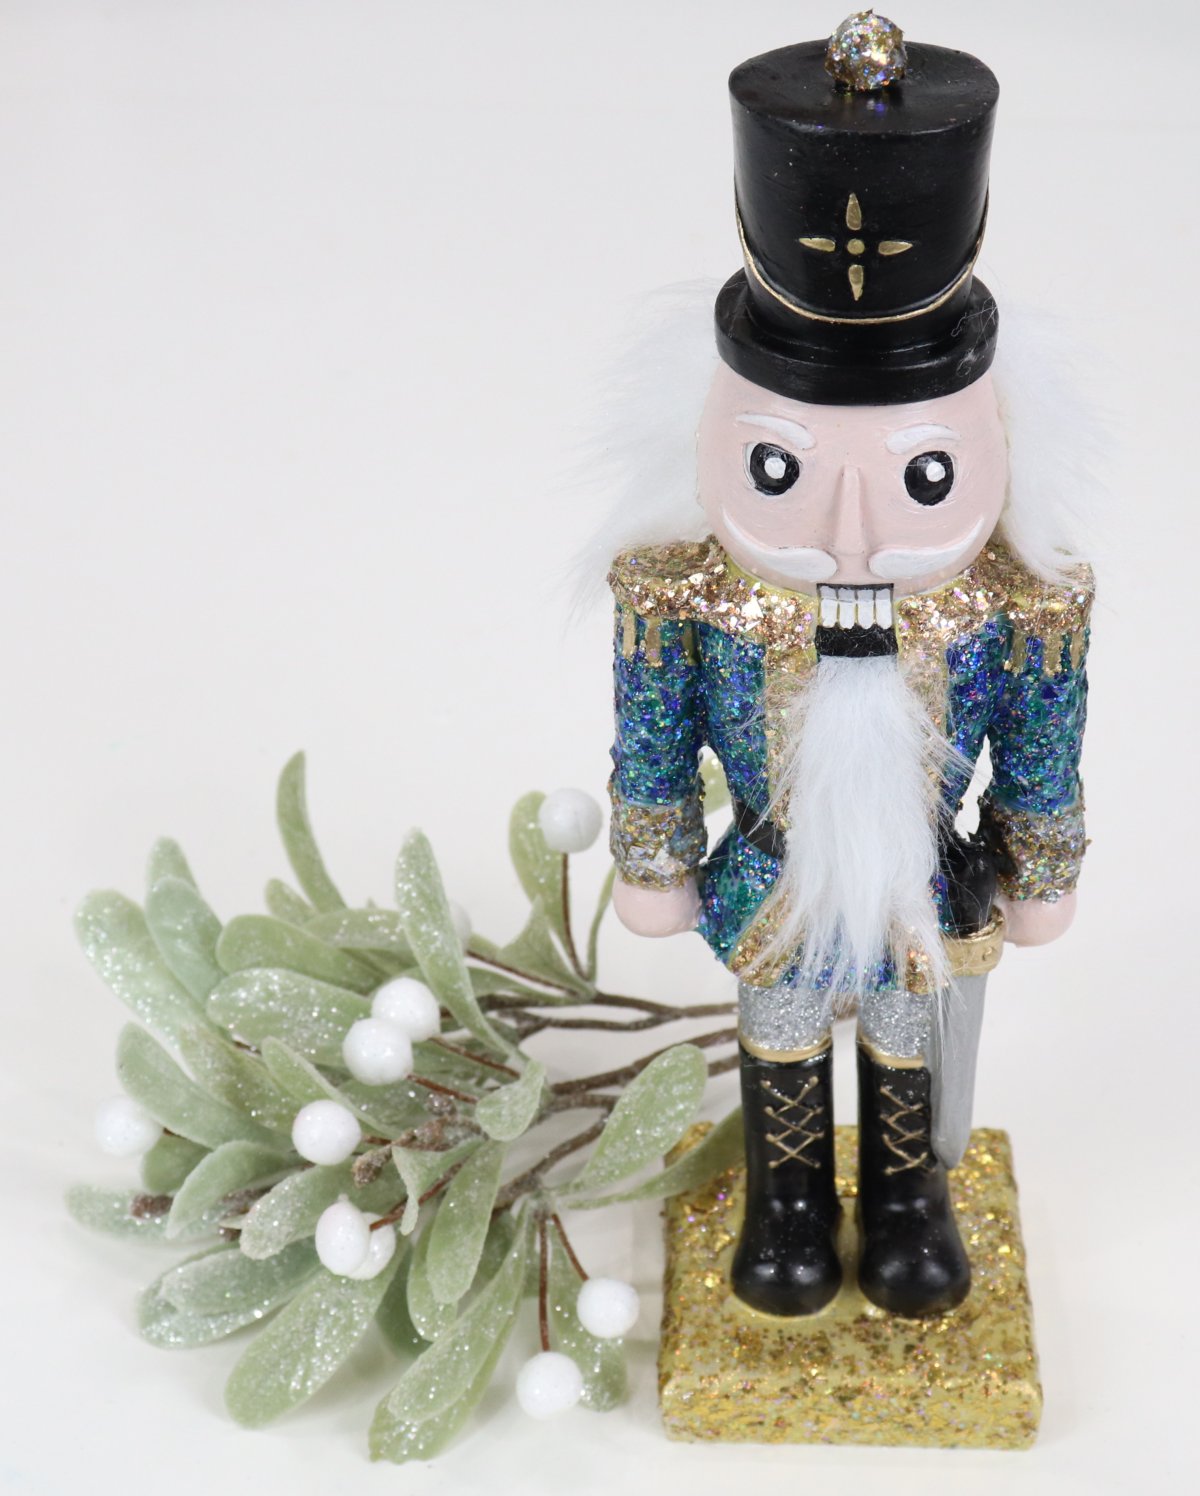 Image contains a handpainted Nutcracker figurine with a black hat and a glittered blue and gold jacket, next to a sprig of mistletoe.